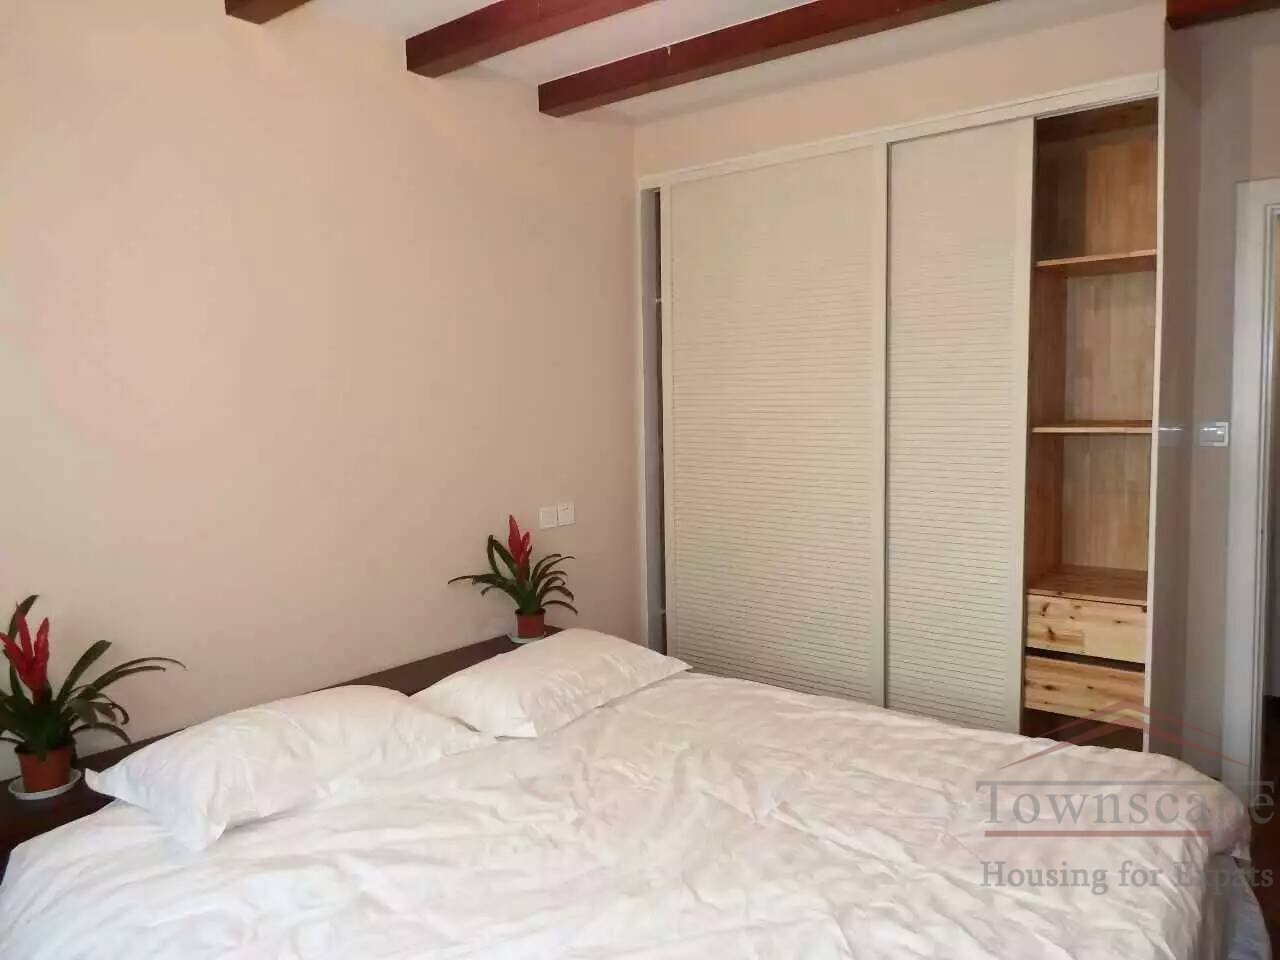 French concession 2br lane house Comfy 2BR Old House Apartment for rent on Jianguo Rd nr Metro 9 & 12